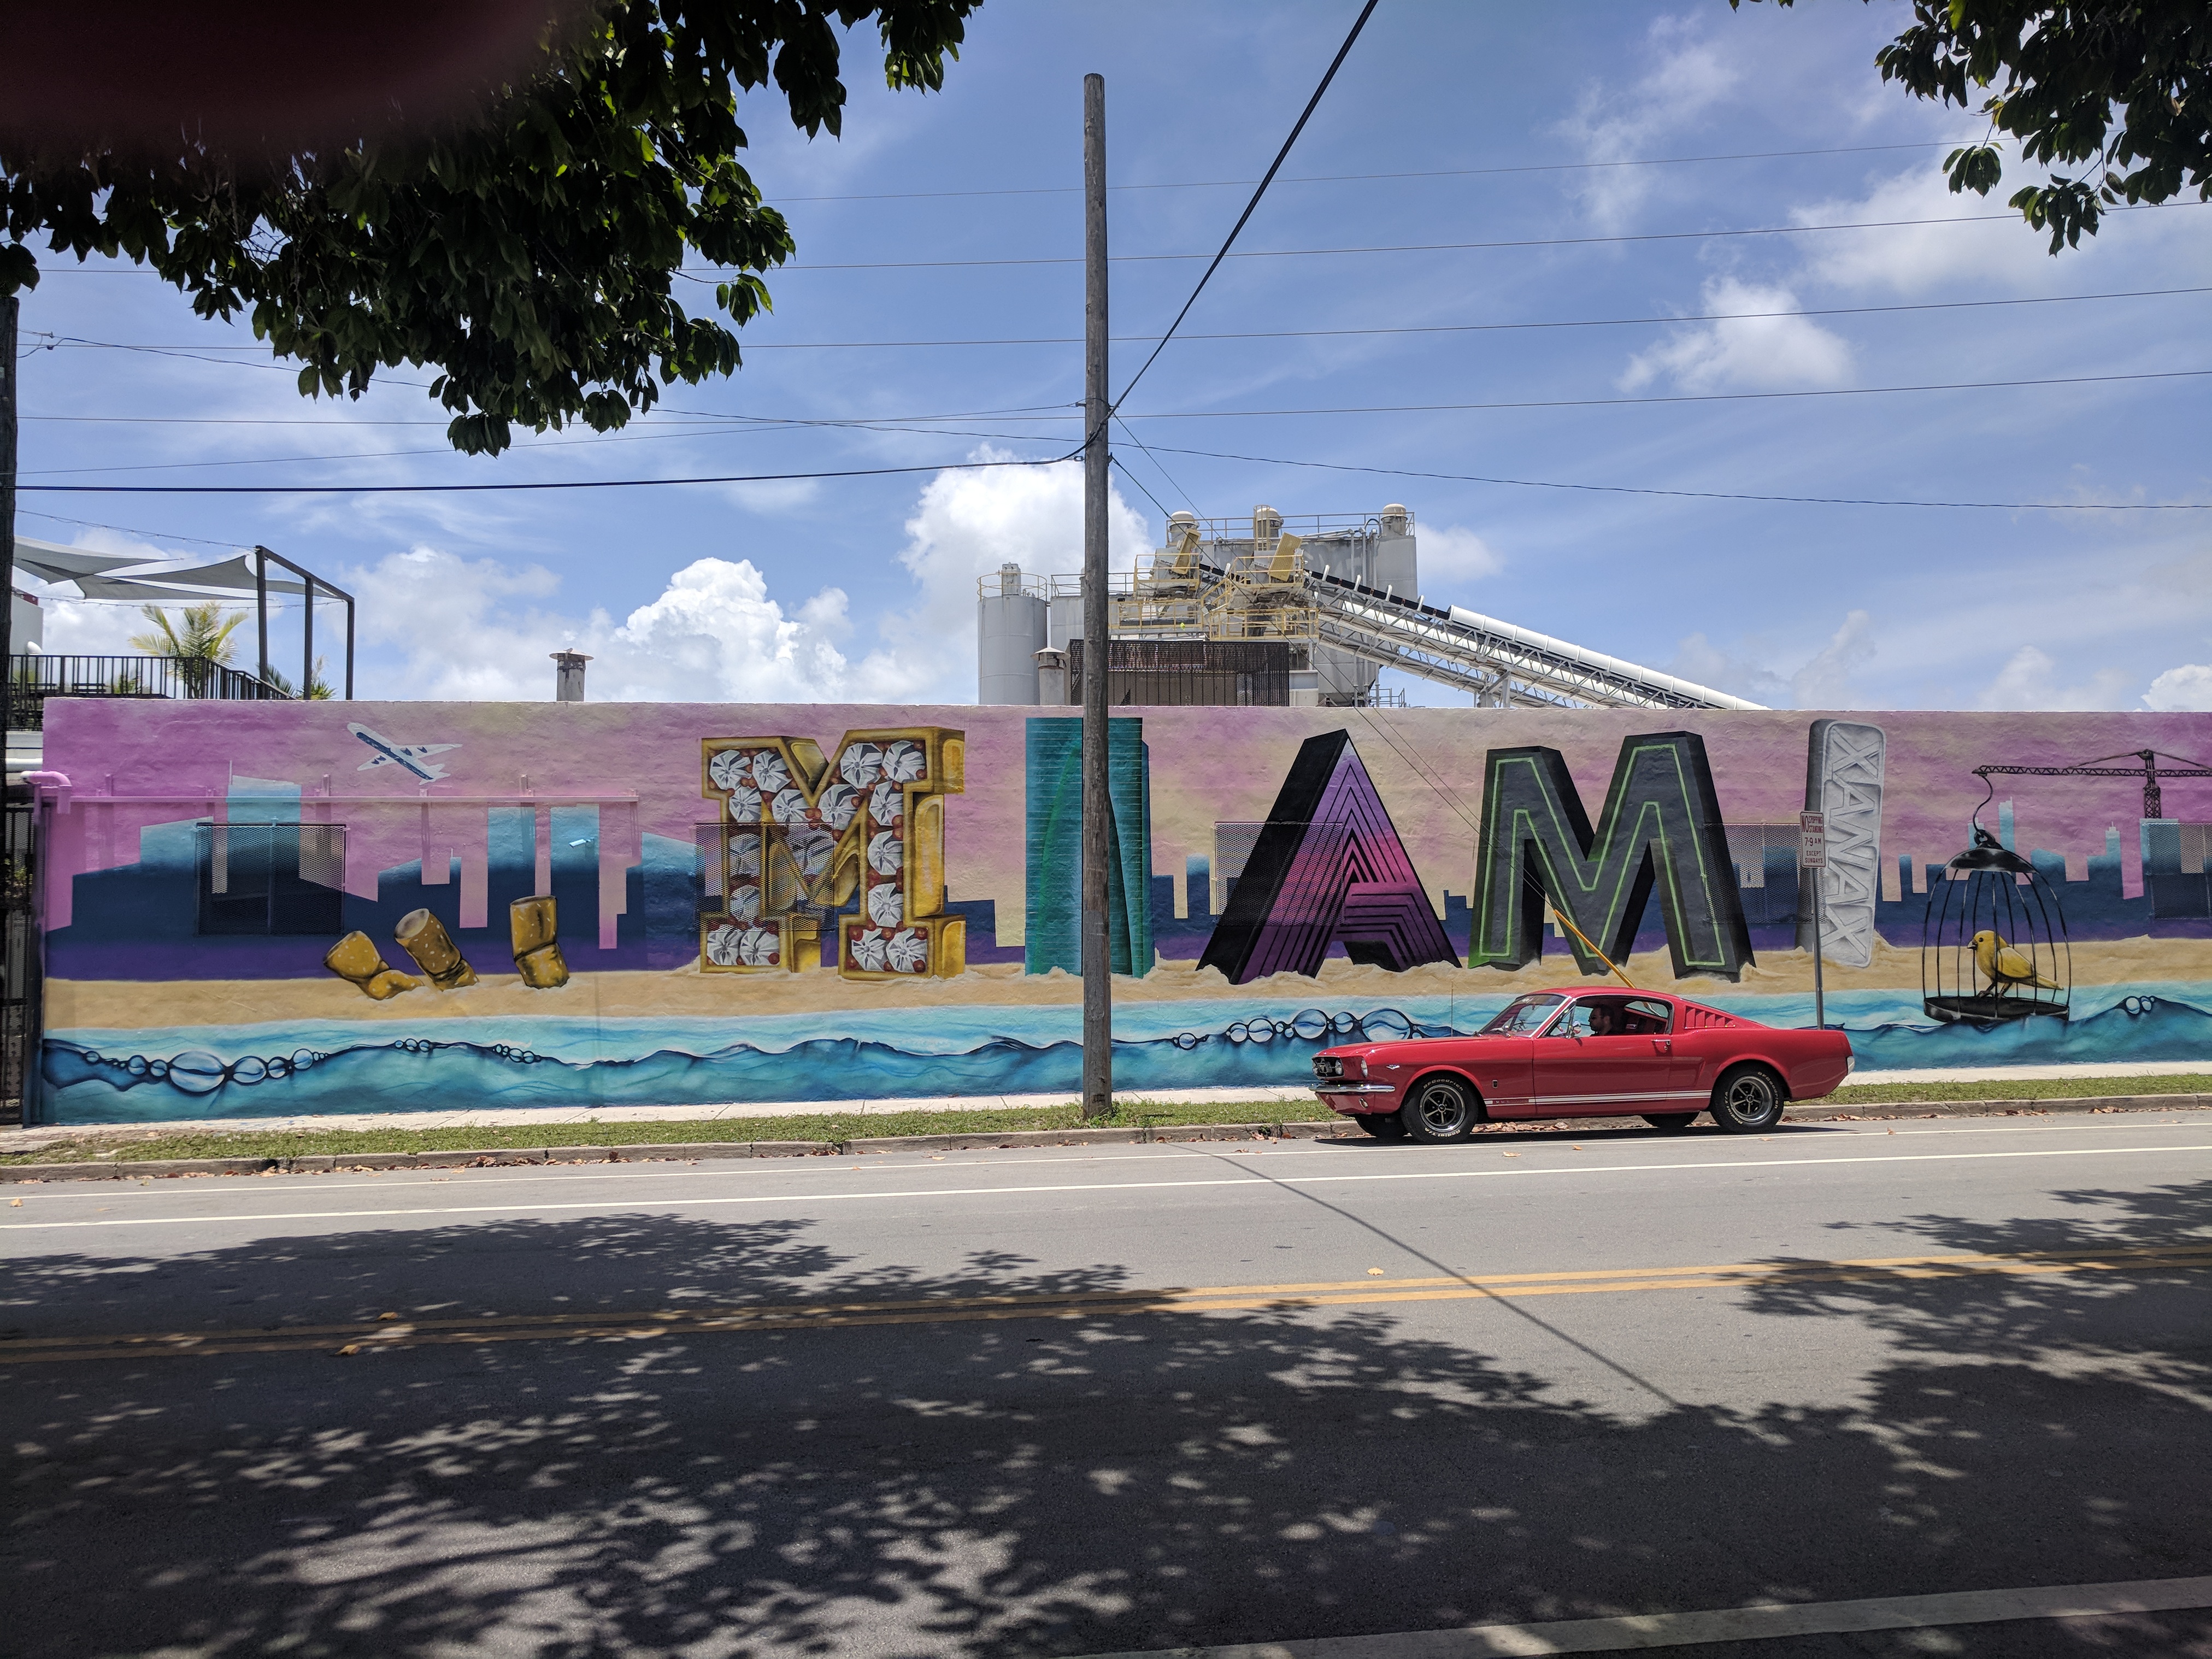 How to spend 72 hours in Miami